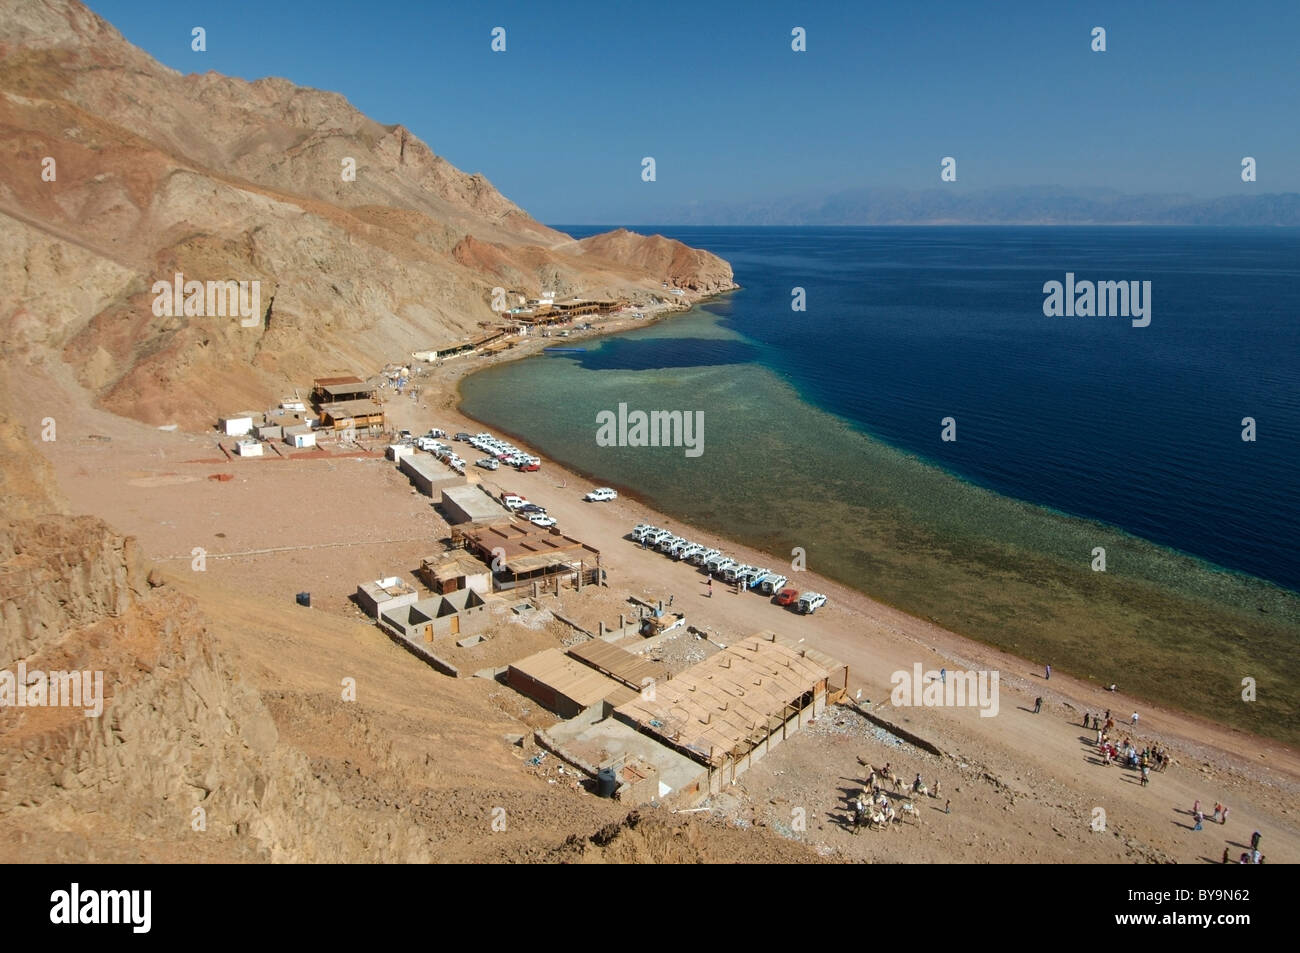 Blue Hole diving location, Dahab, Red Sea, Egypt, Africa Stock Photo